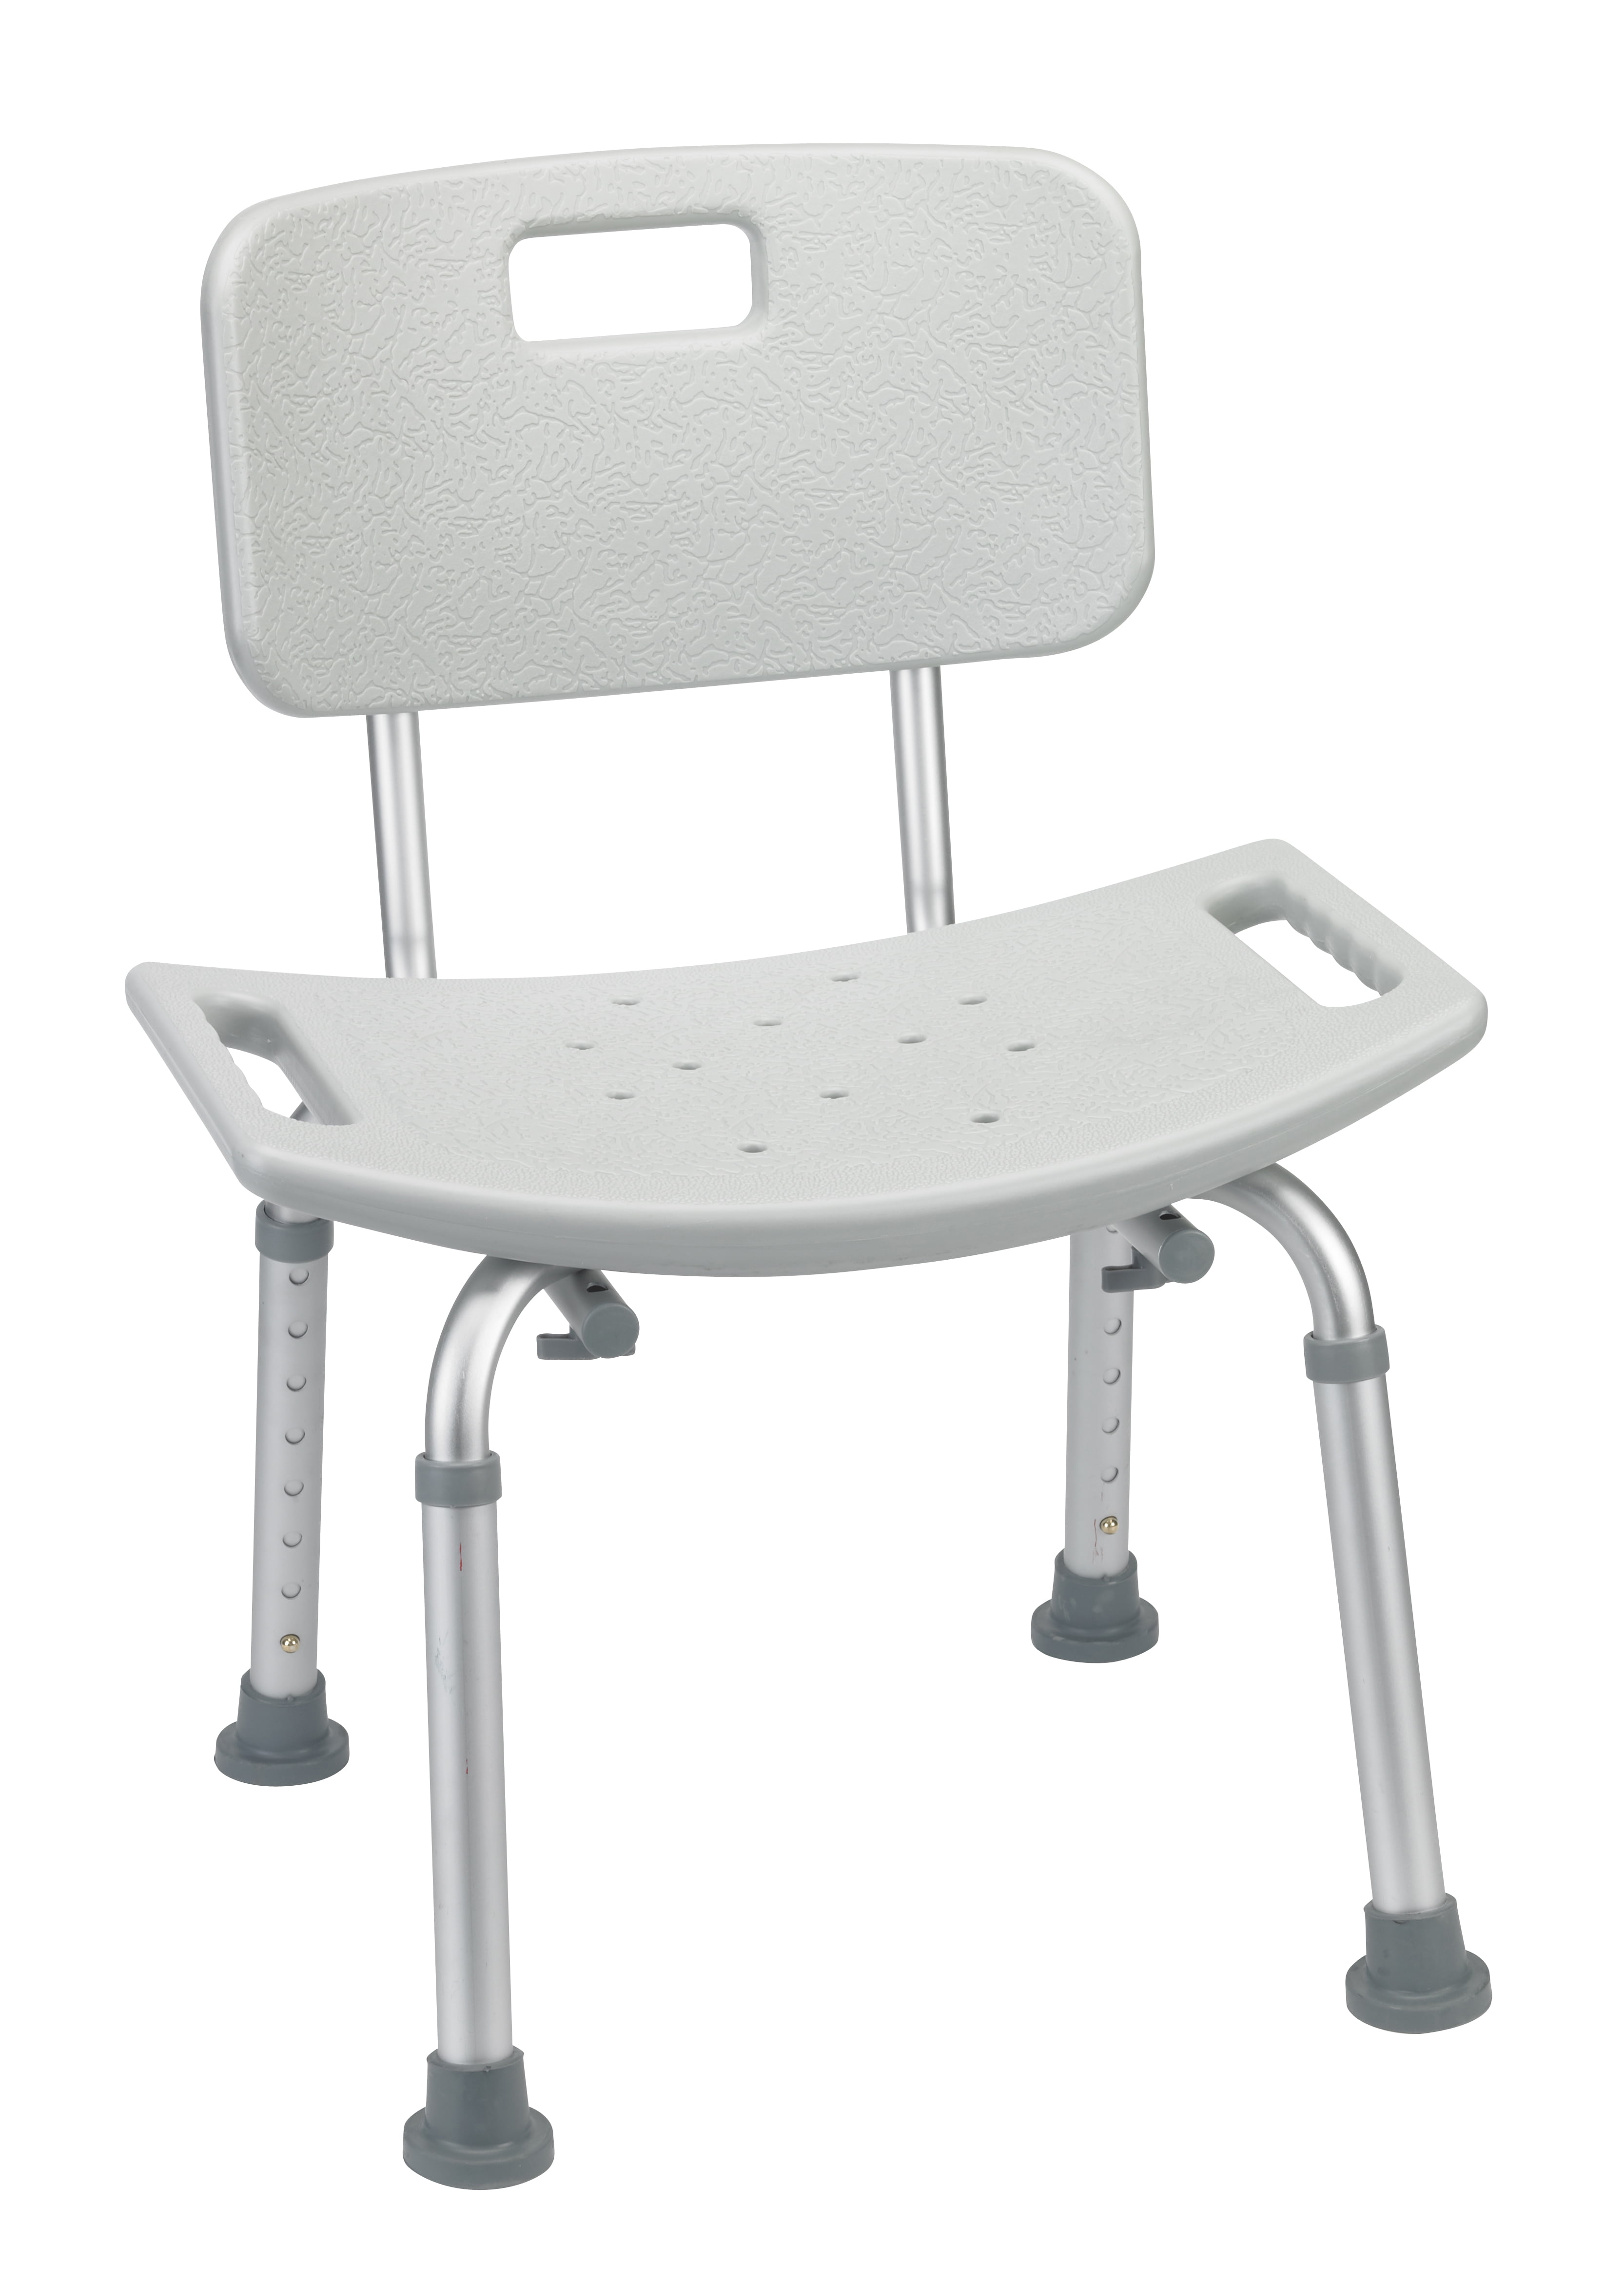 Bath Seat And Shower Chair With Back 